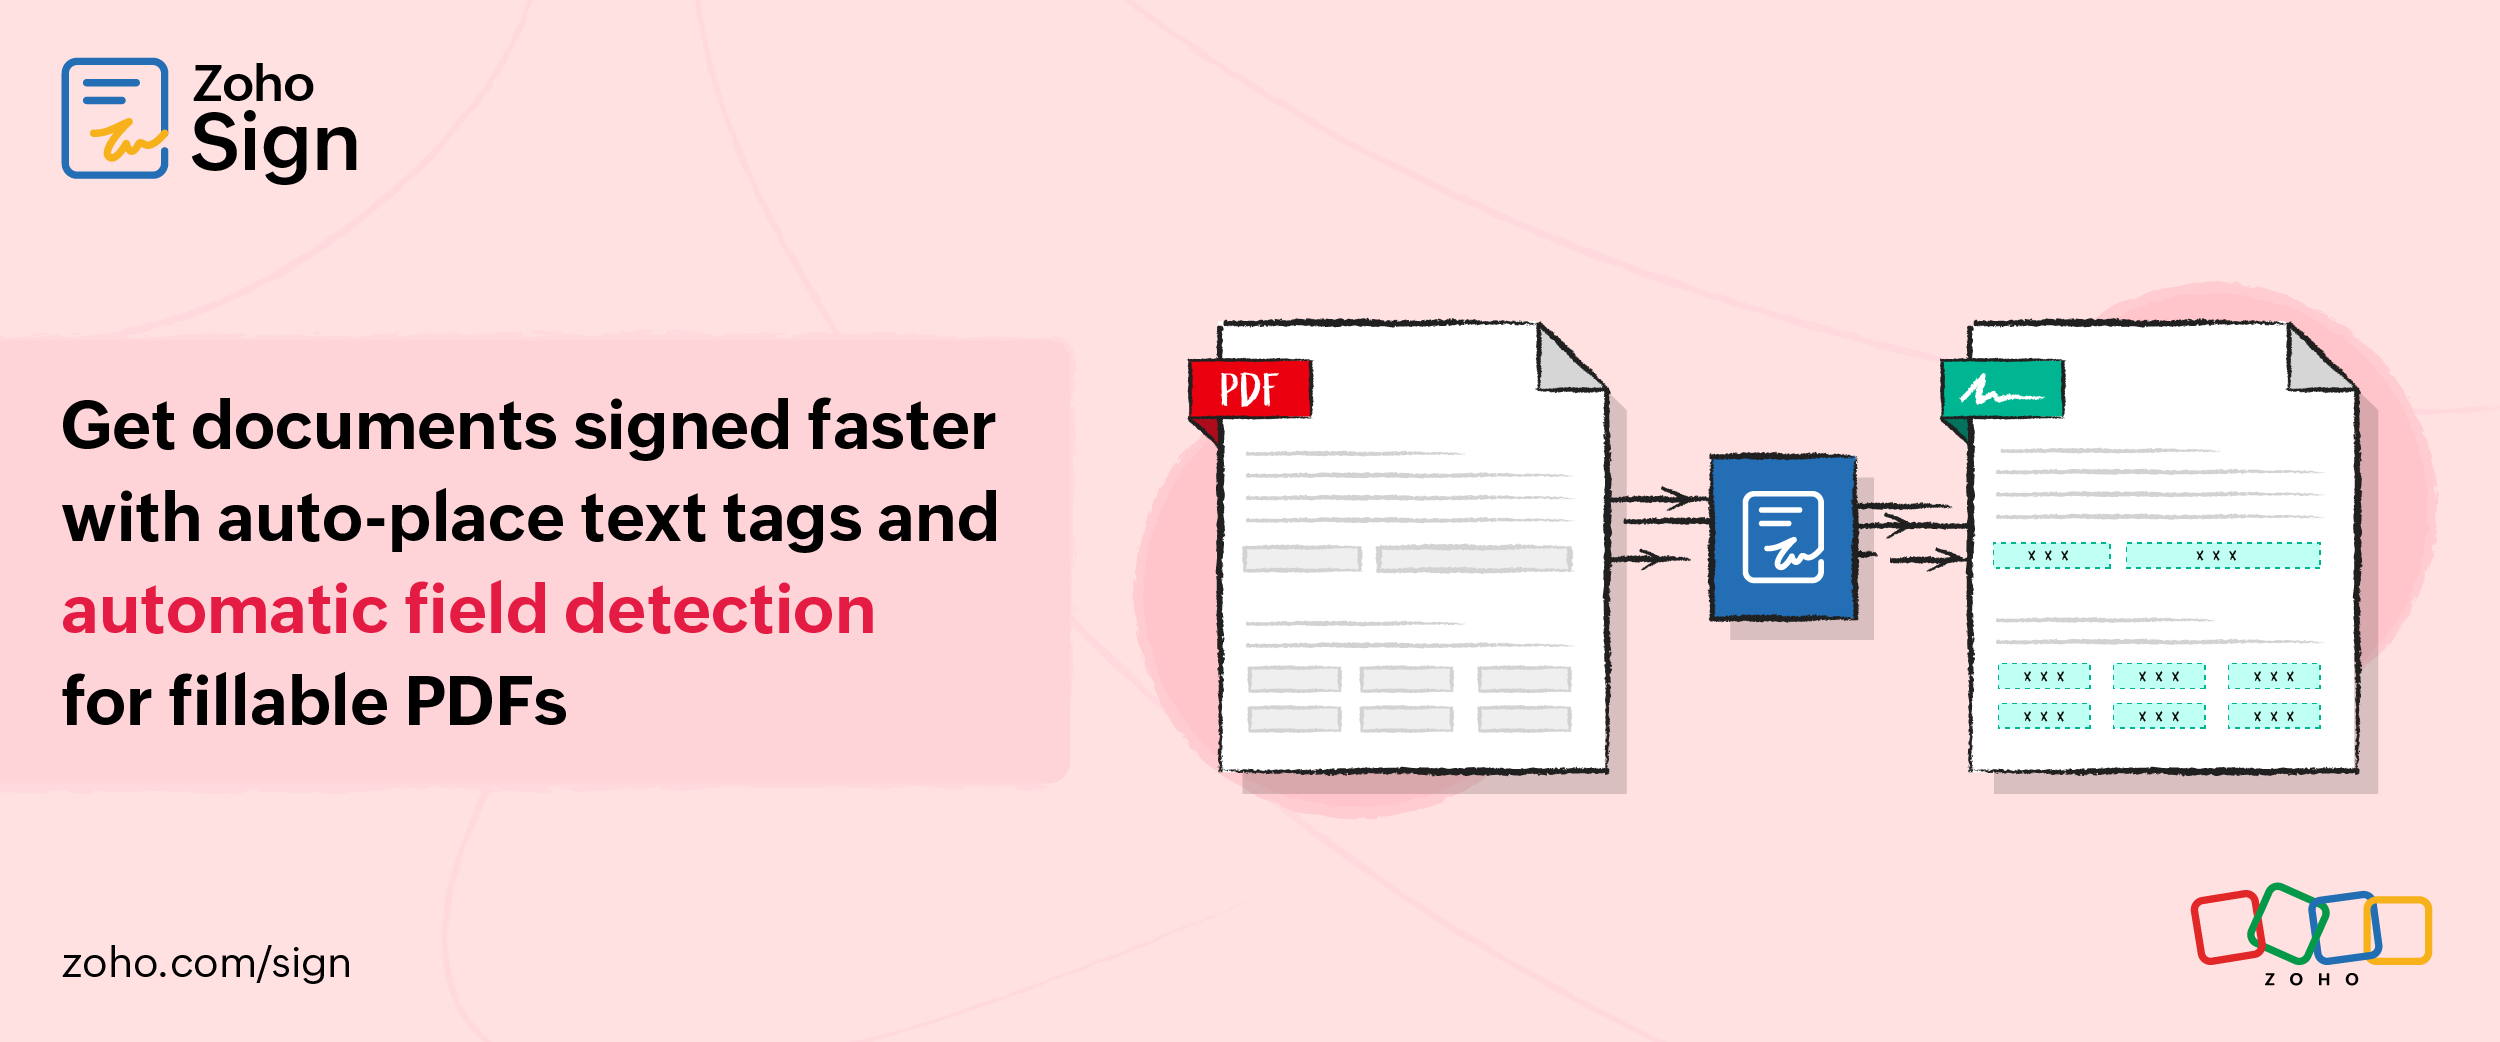 Get documents signed faster with auto-place text tags and automatic field detection for fillable PDFs